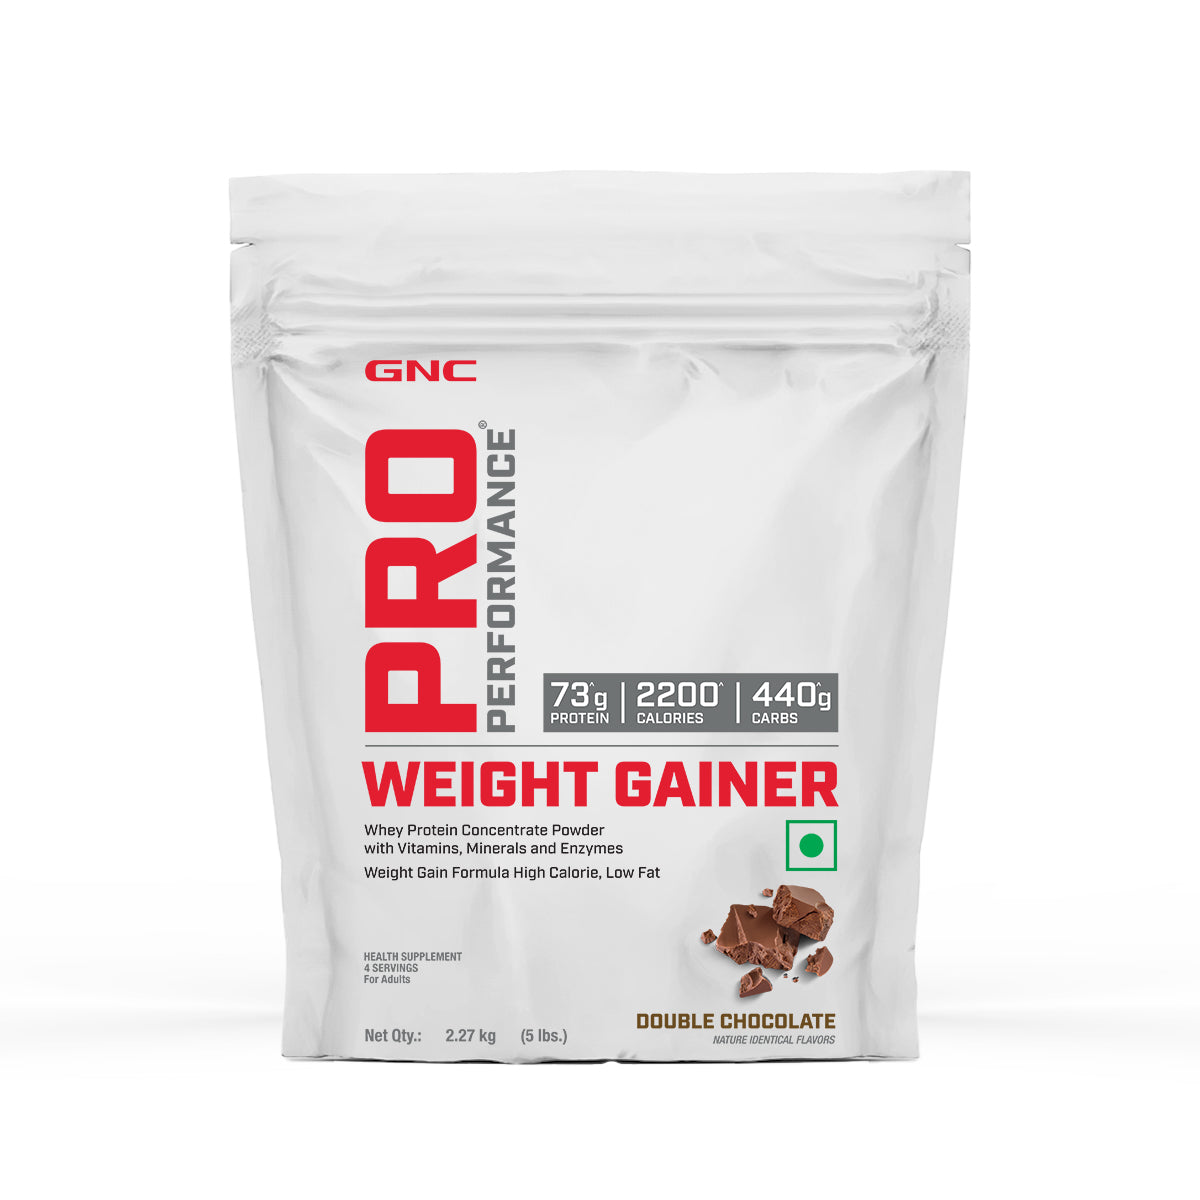 GNC Pro Performance Weight Gainer - High-Calorie, Low-Fat Formula For Healthy Body Gains